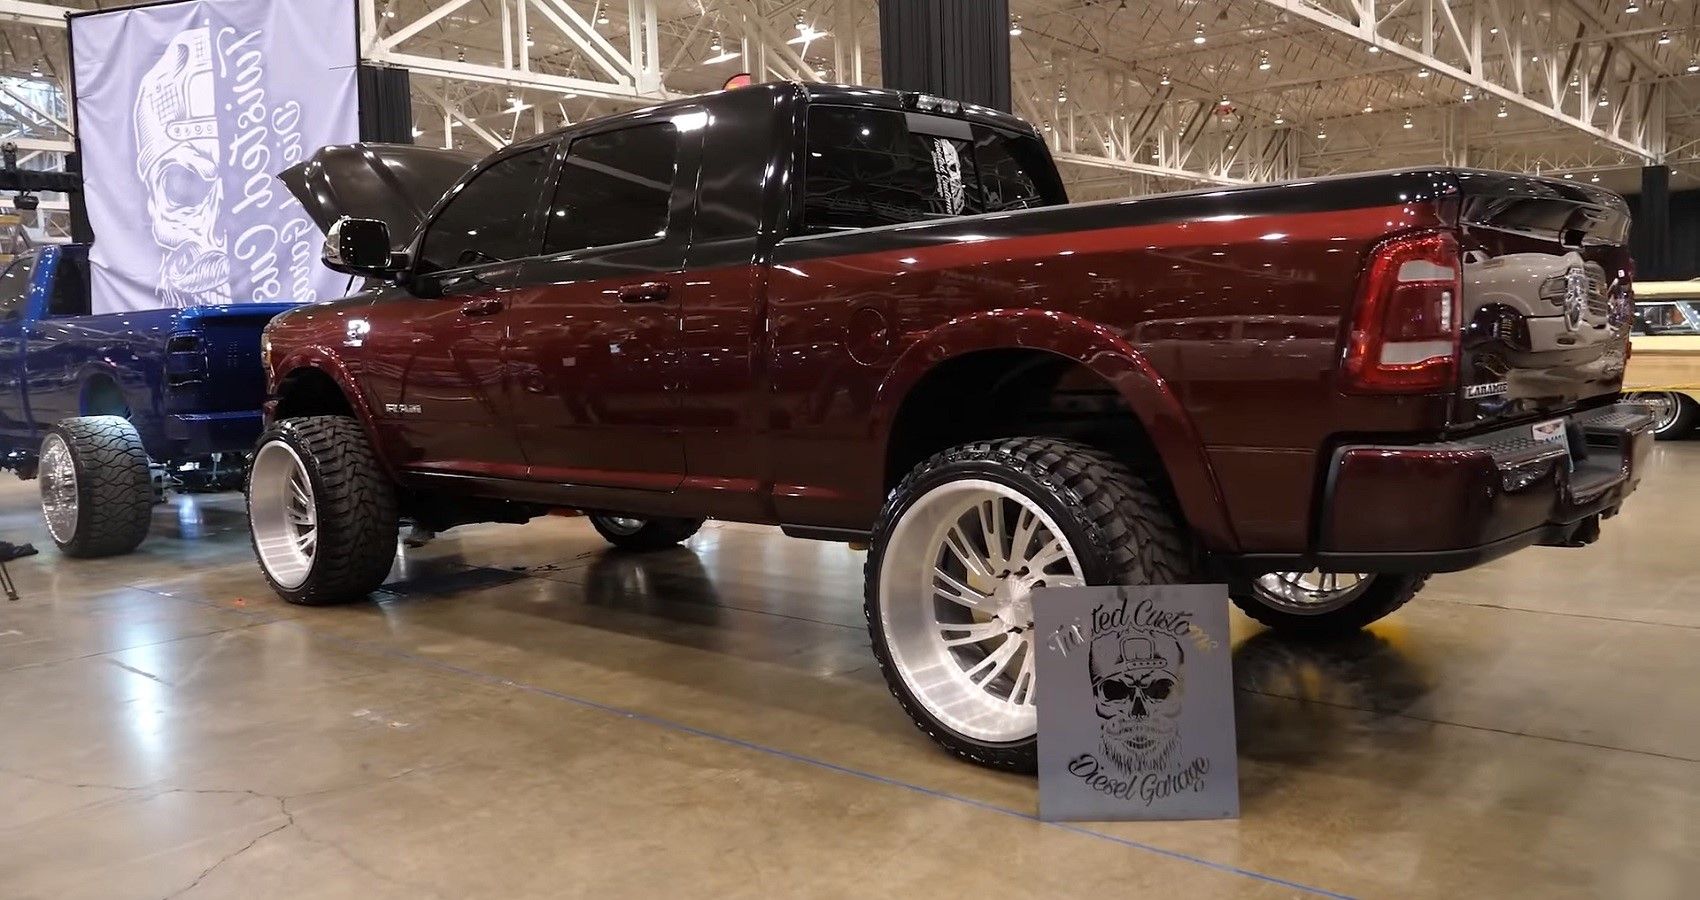 Here’s Why We Love This 2019 Twisted Customs Dodge Ram With A 6.7 Liter Cummins Diesel Engine